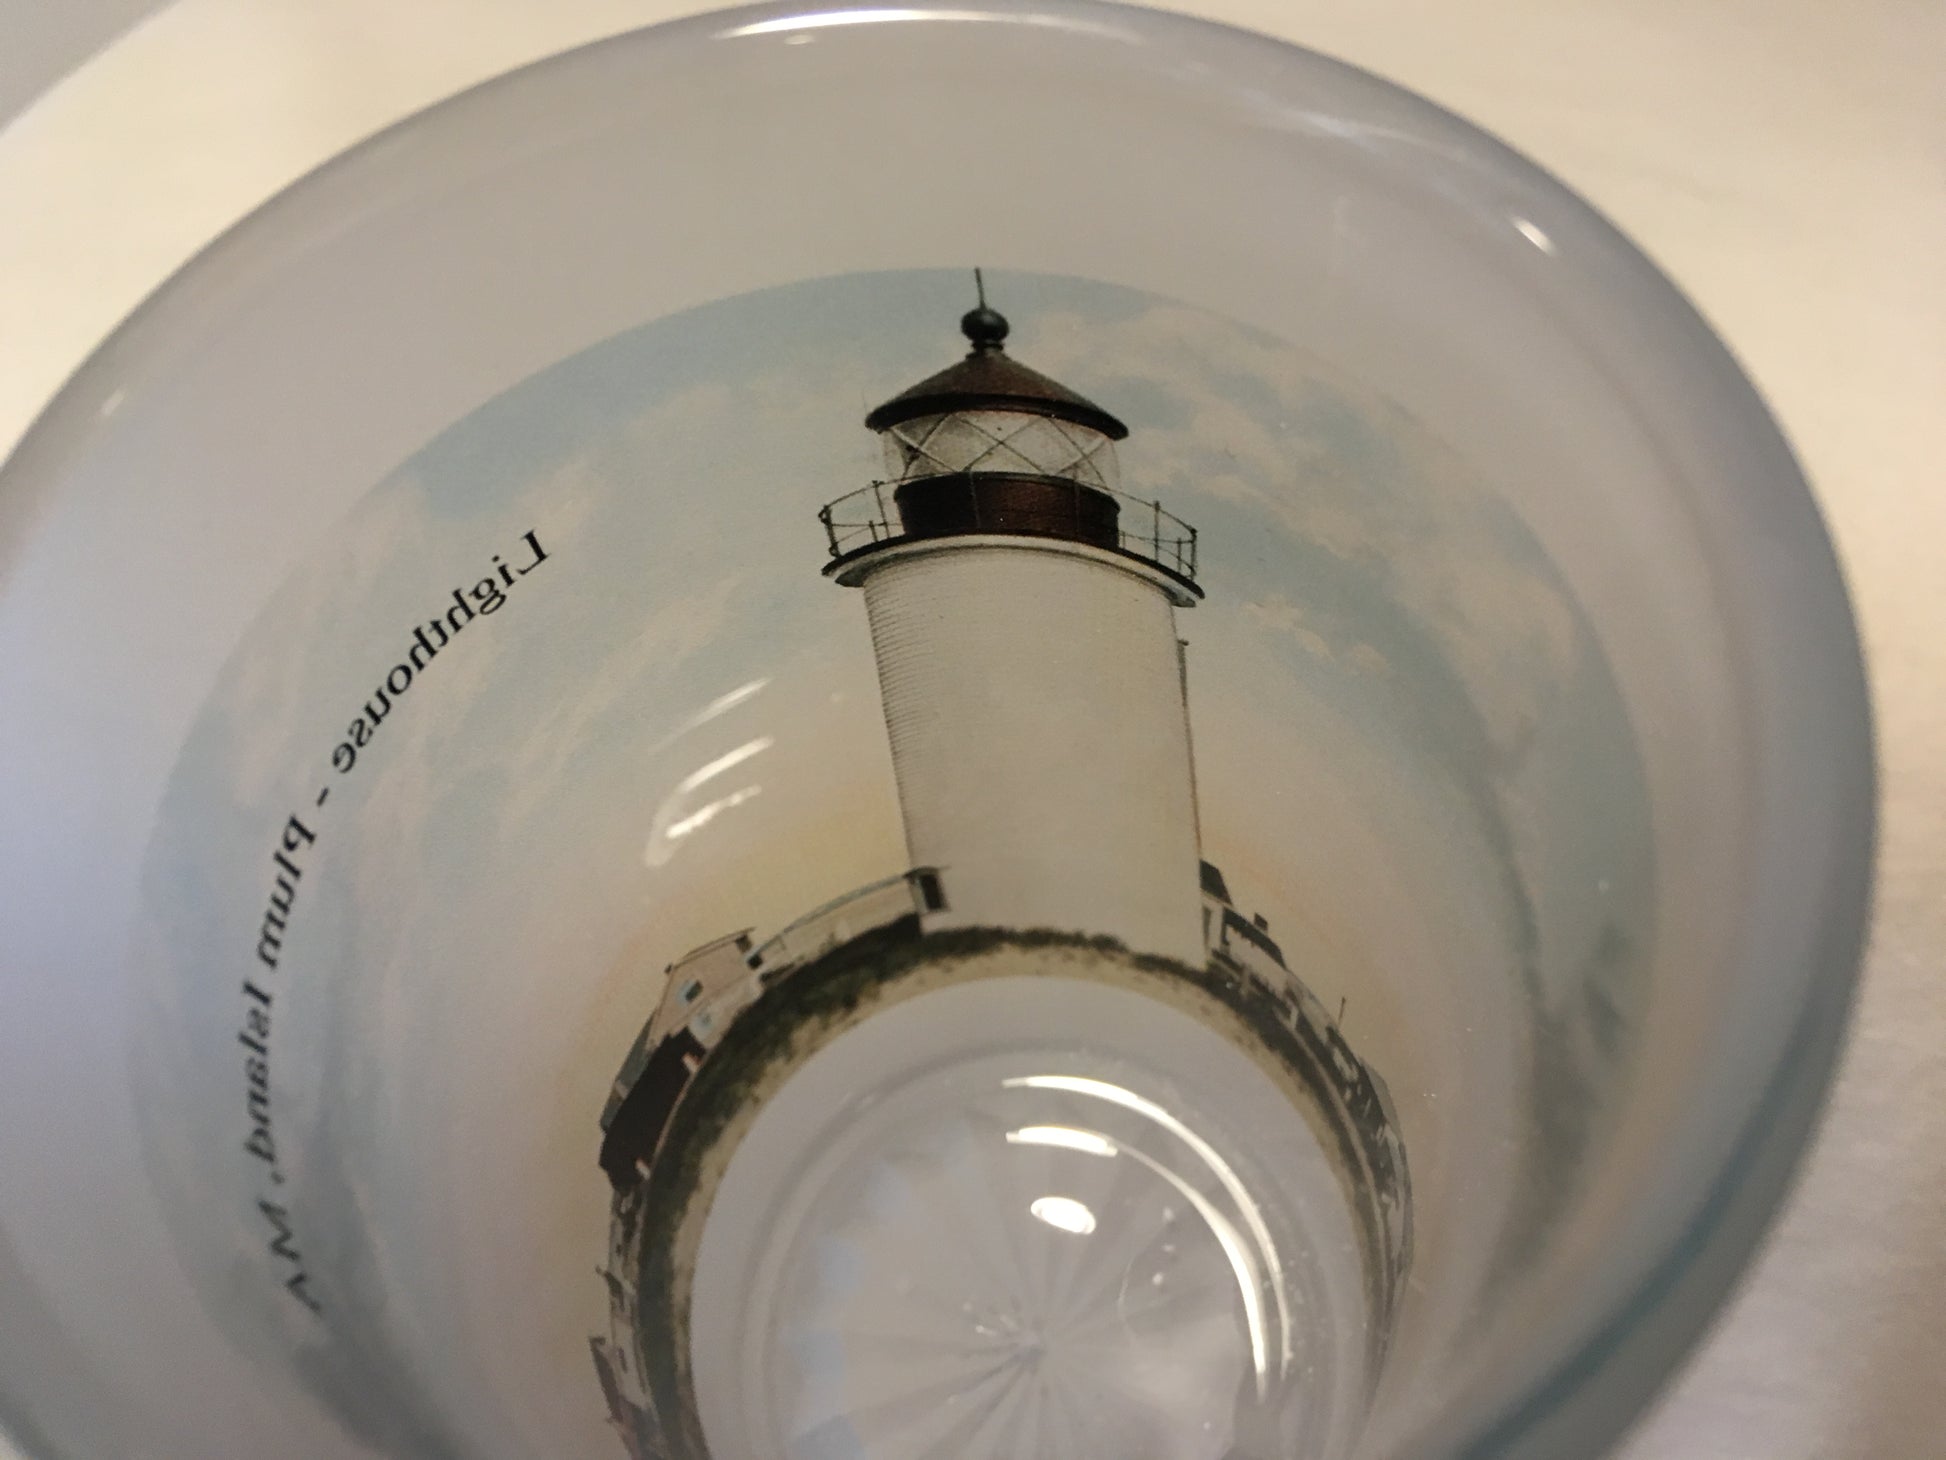 Colorful Frosted Glass Mug of Plum Island Light  In Newburyport, MA - That Fabled Shore Home Decor